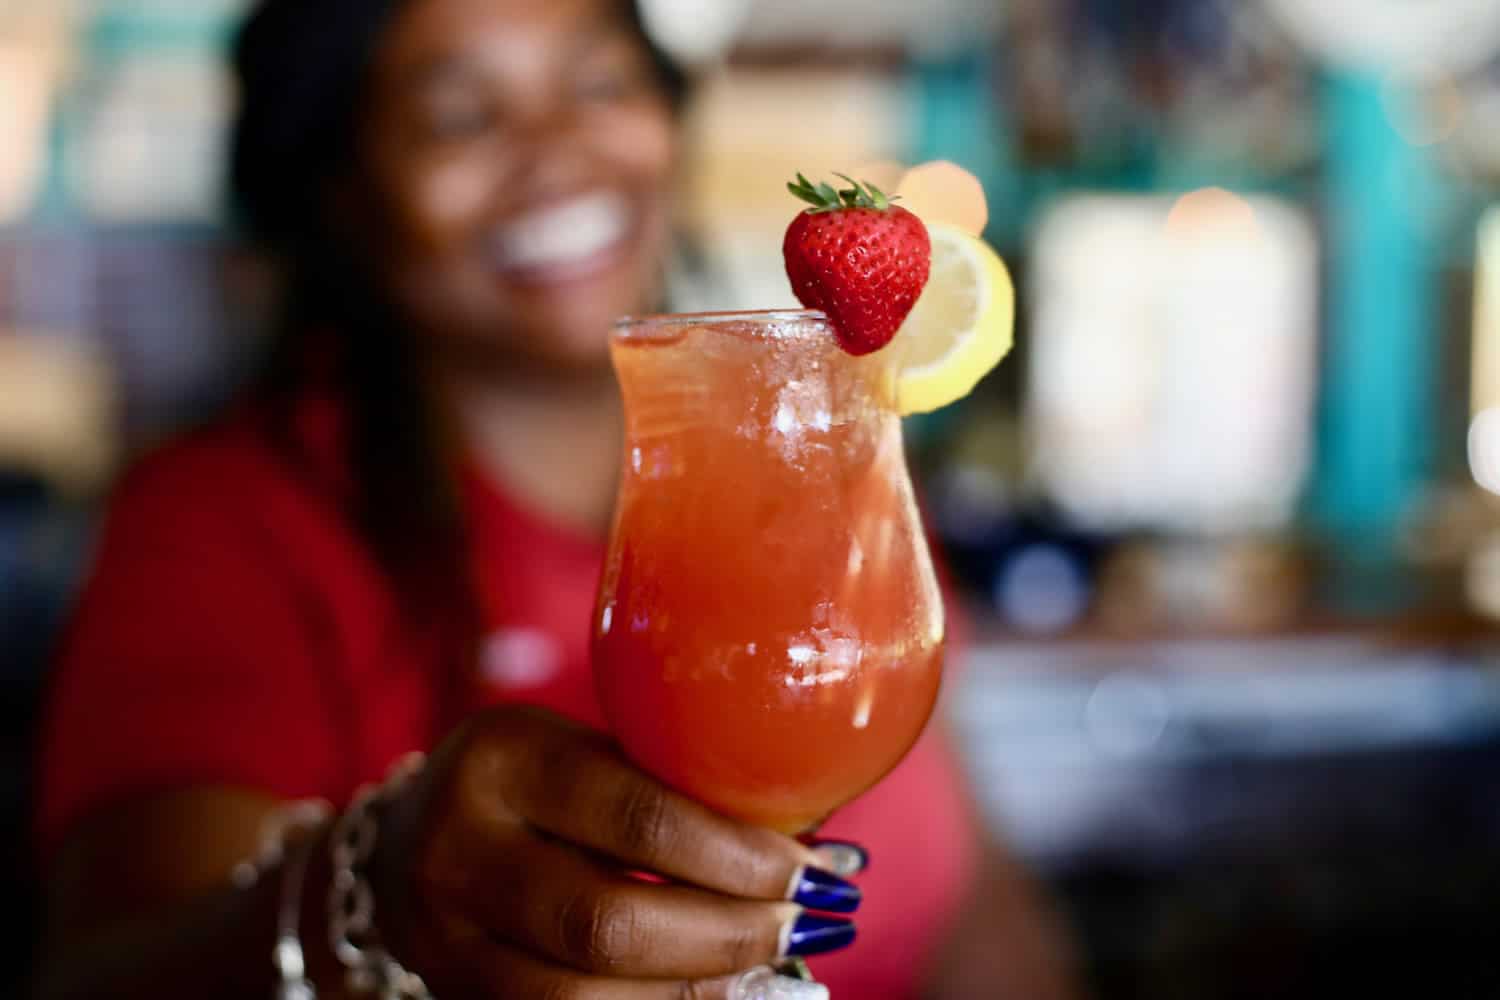 A bartender in Staniel Cay, The Bahamas, holds up a strawberry drink with a straw.